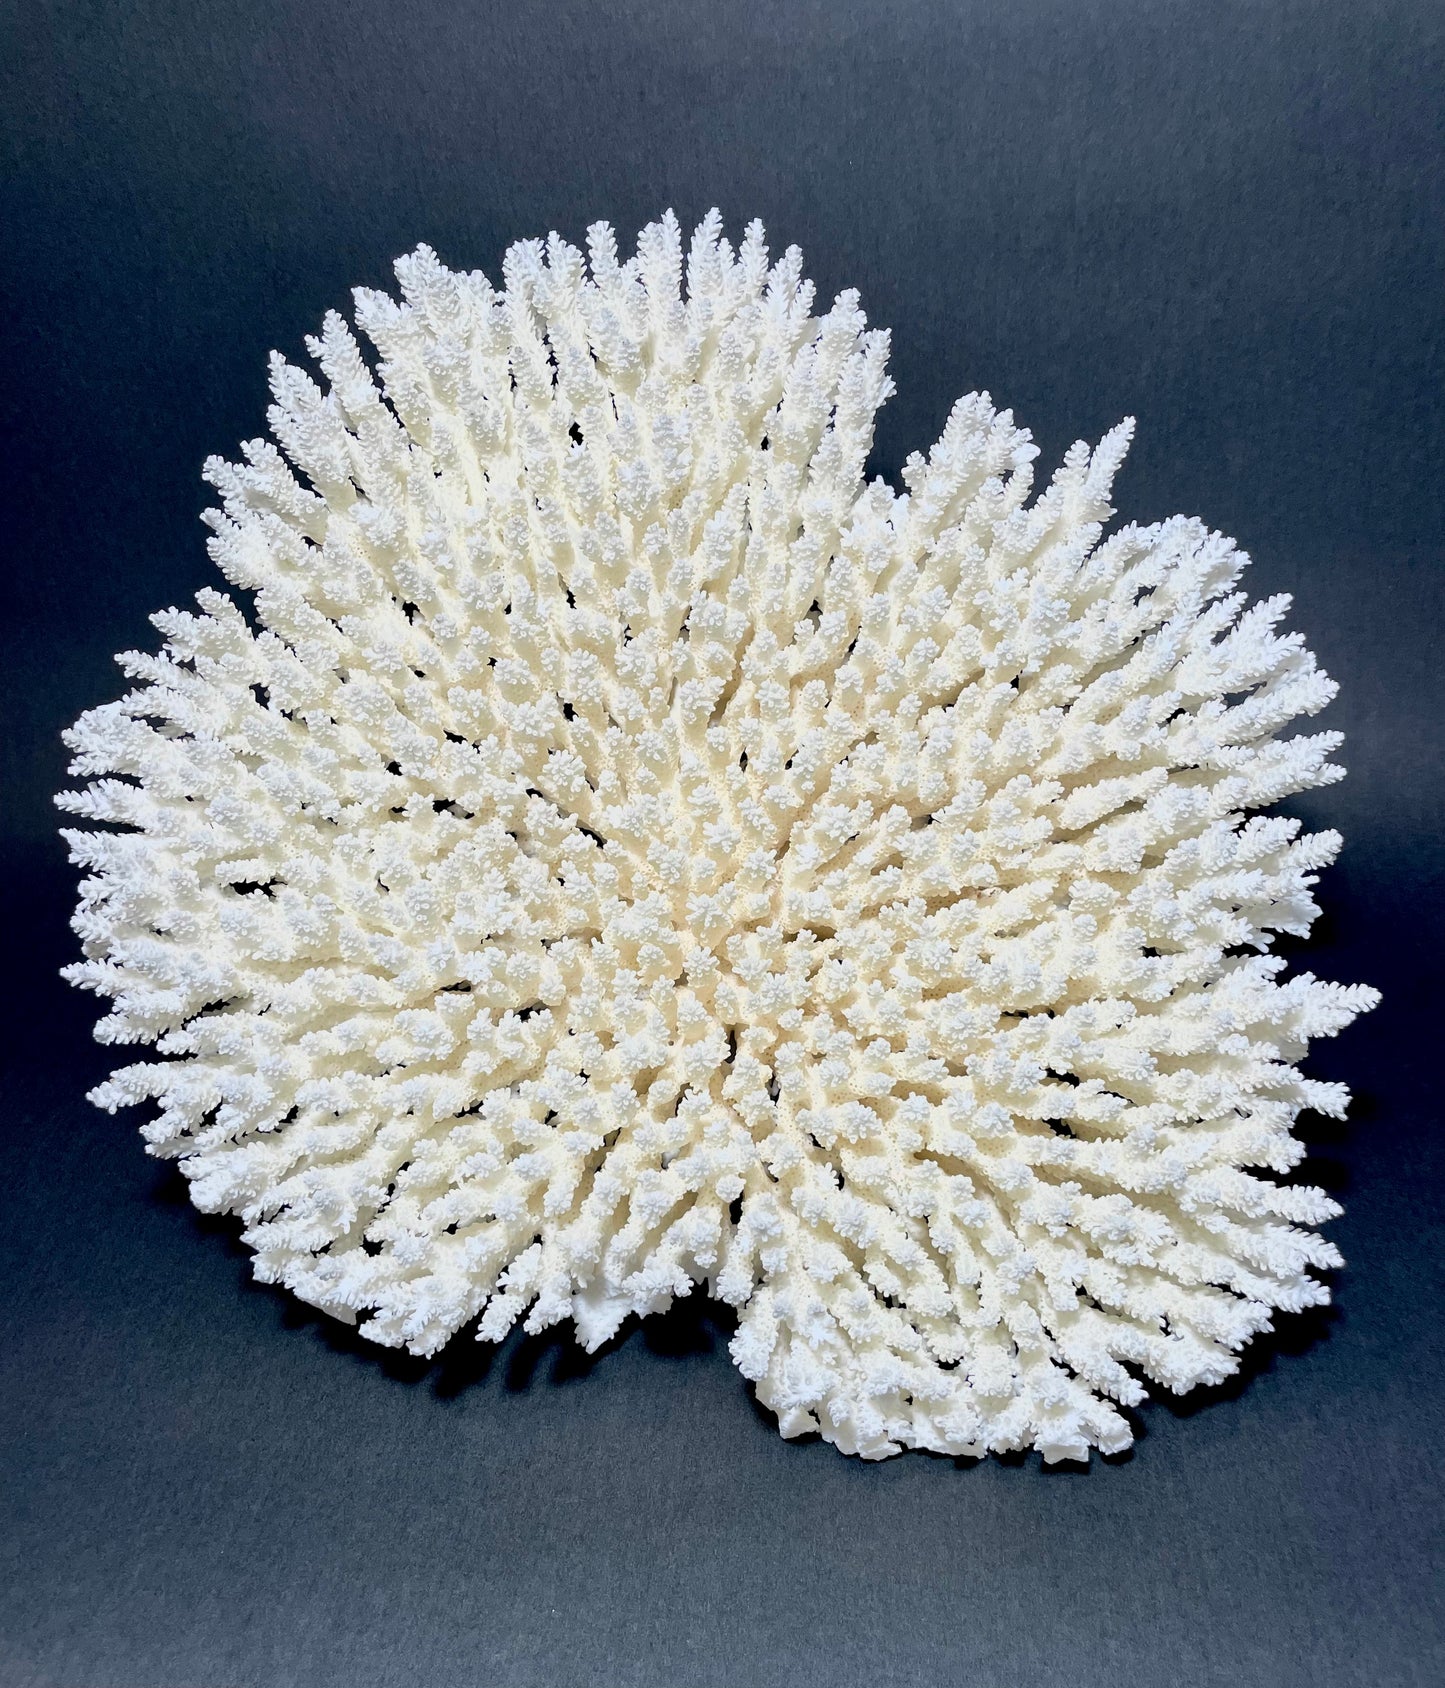 Table Coral 17” x 18” - Treasures from Beneath